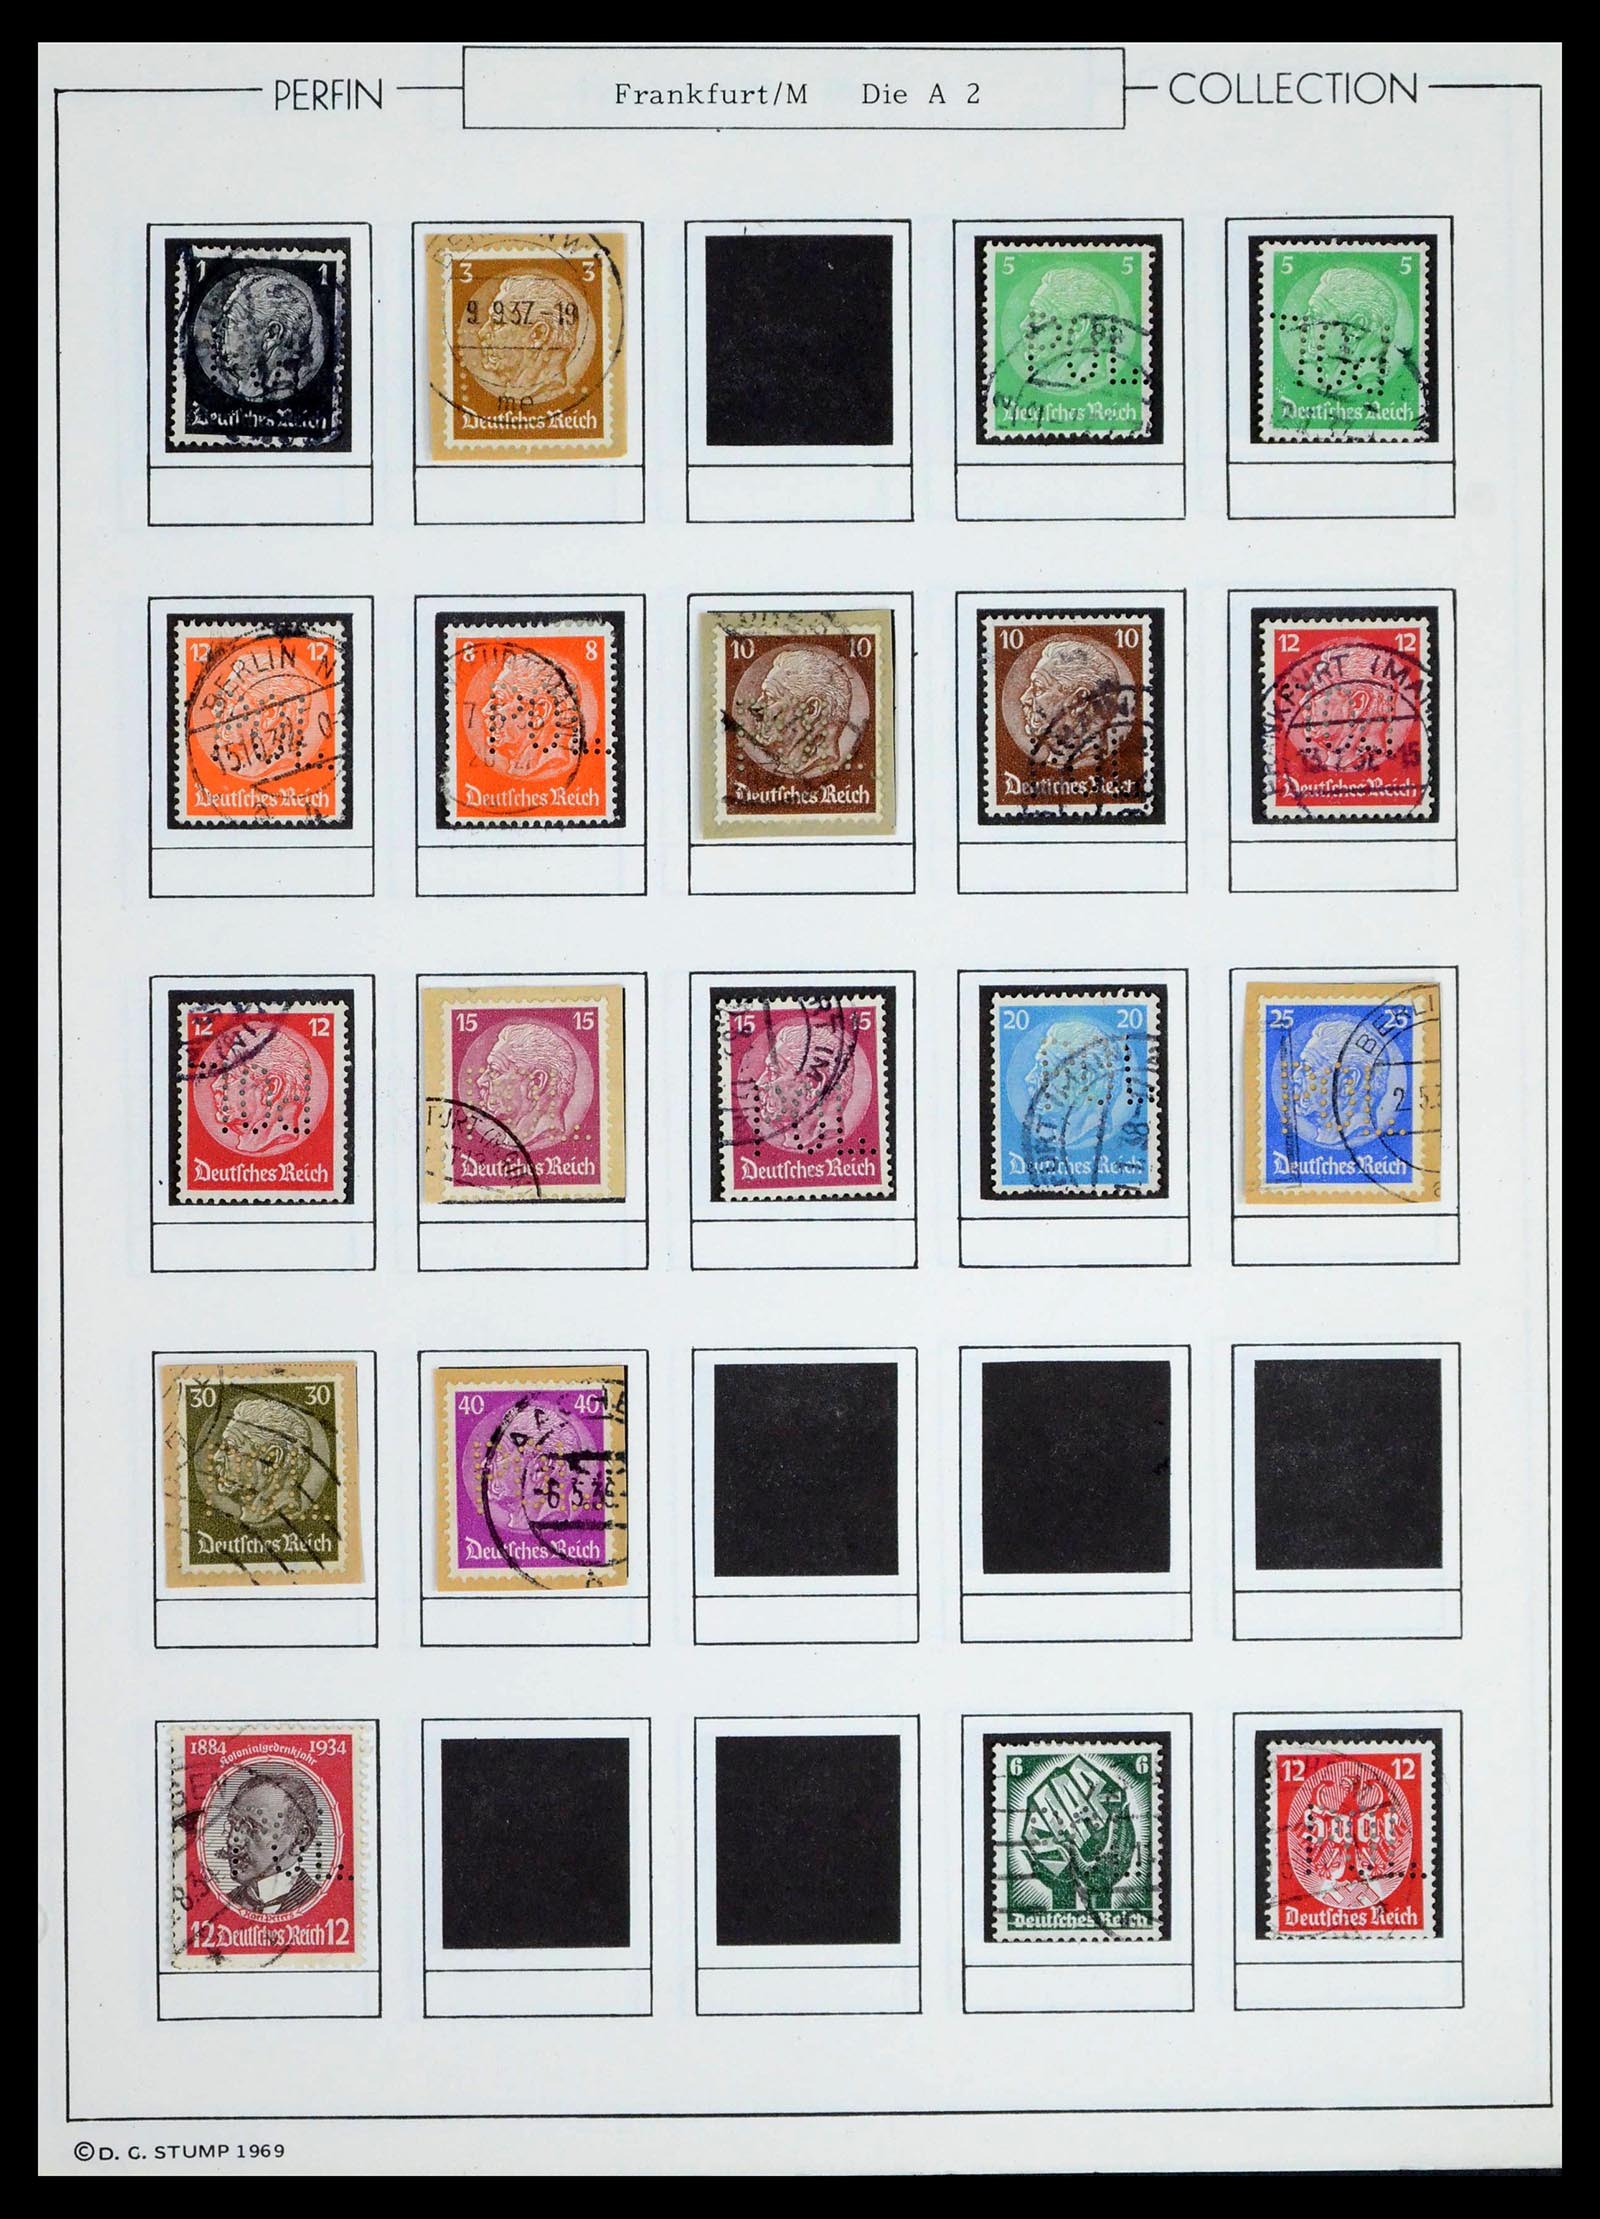 39458 0029 - Stamp collection 39458 Germany POL lochungen 1926-1955.